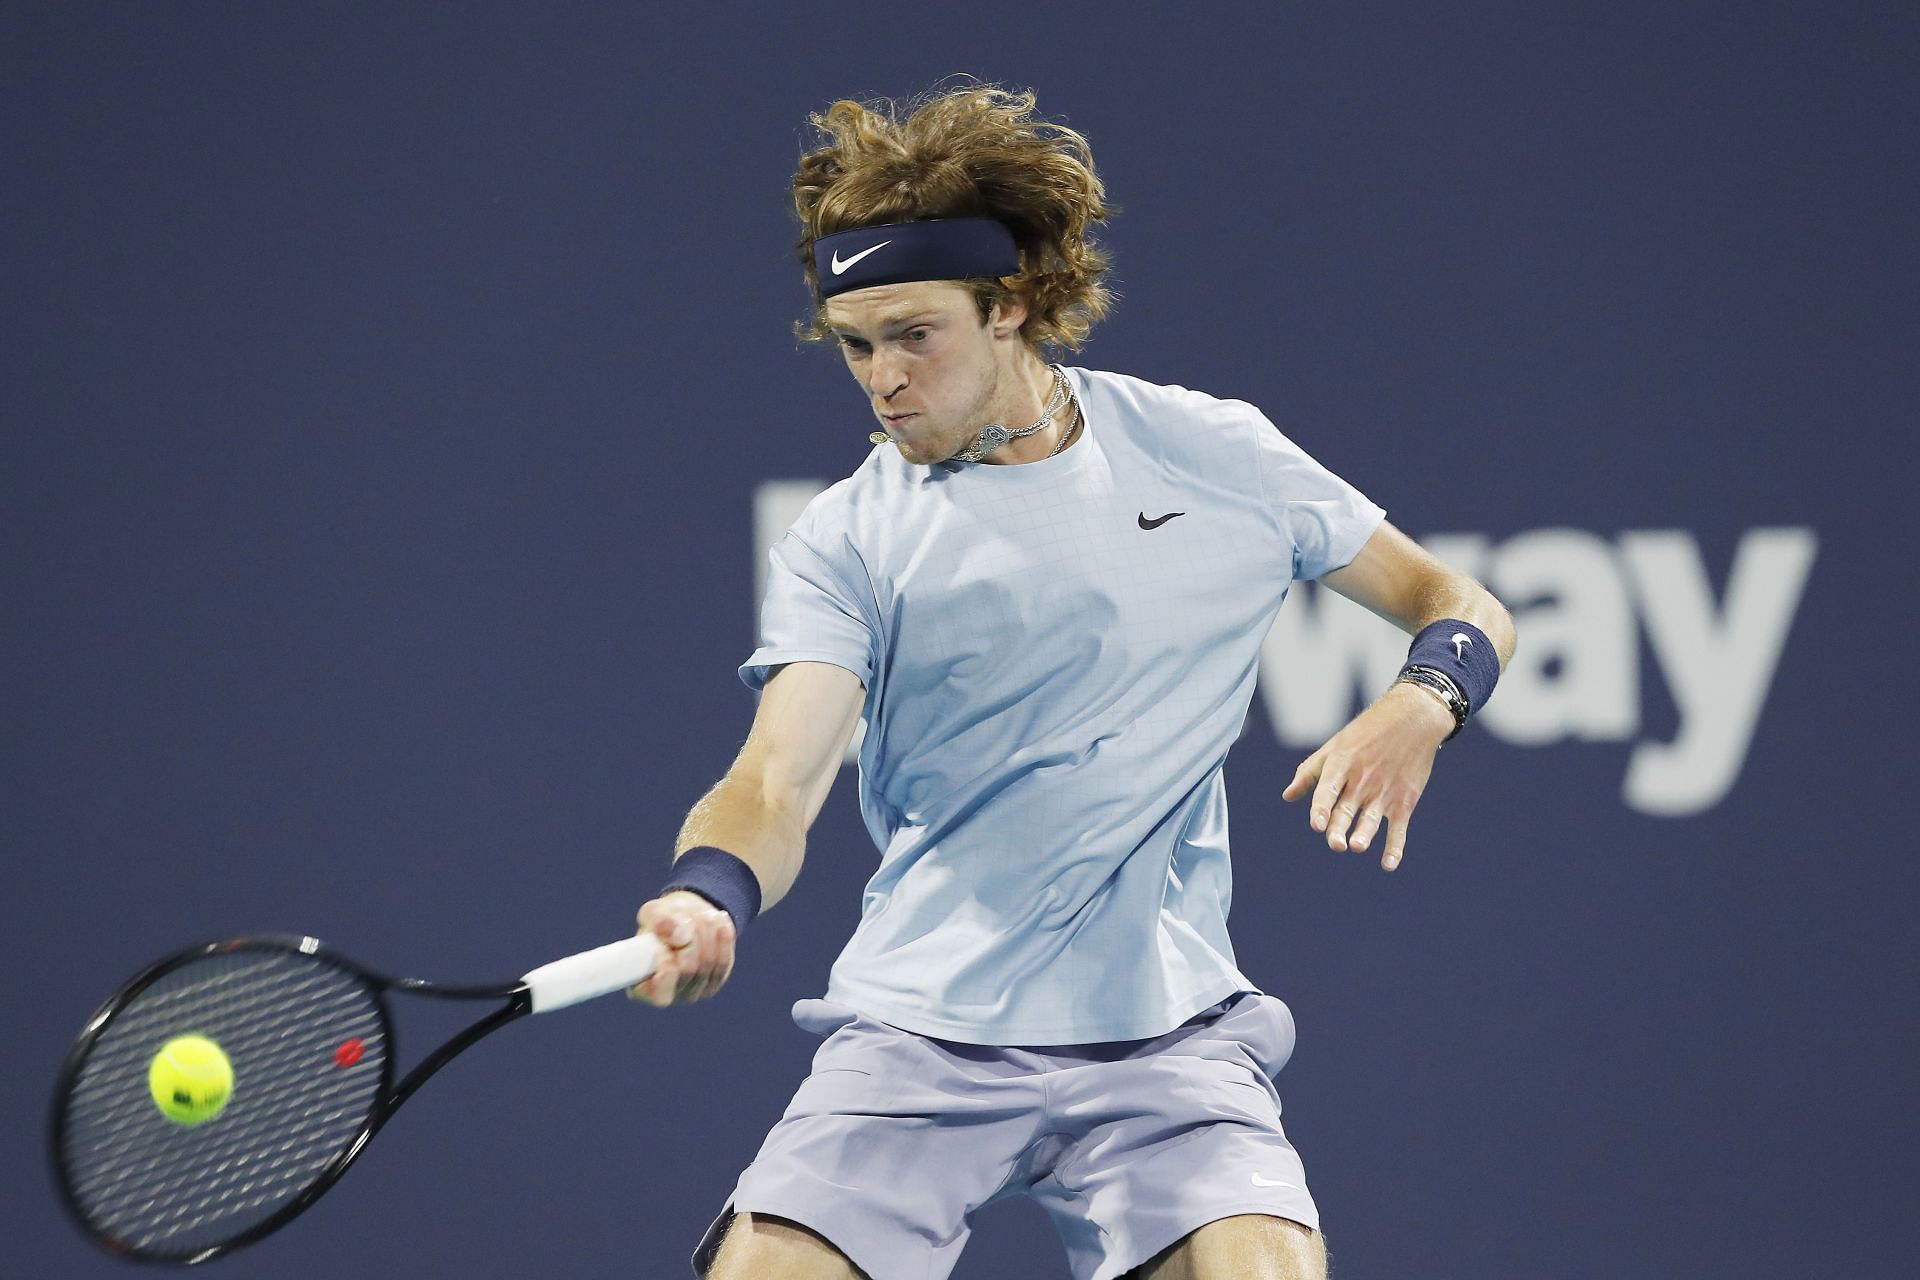 Andrey Rublev at the 2021 Miami Open